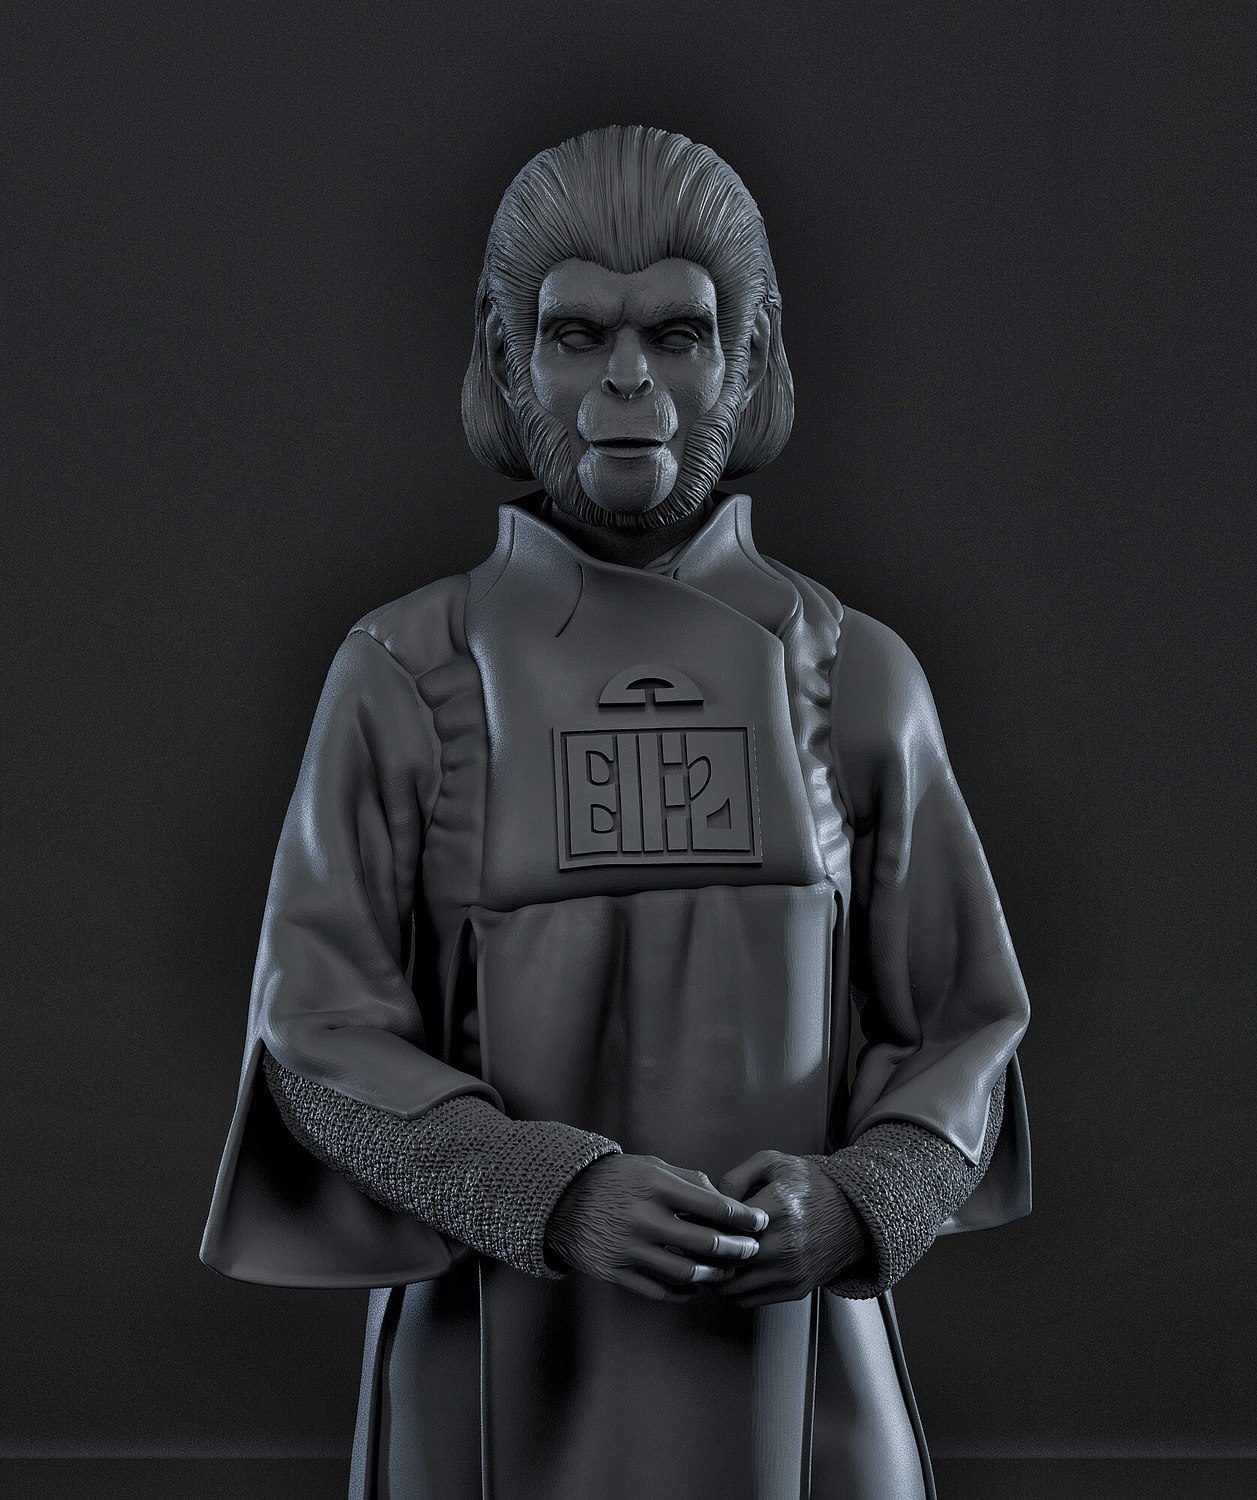 Zira From Planet of the Apes